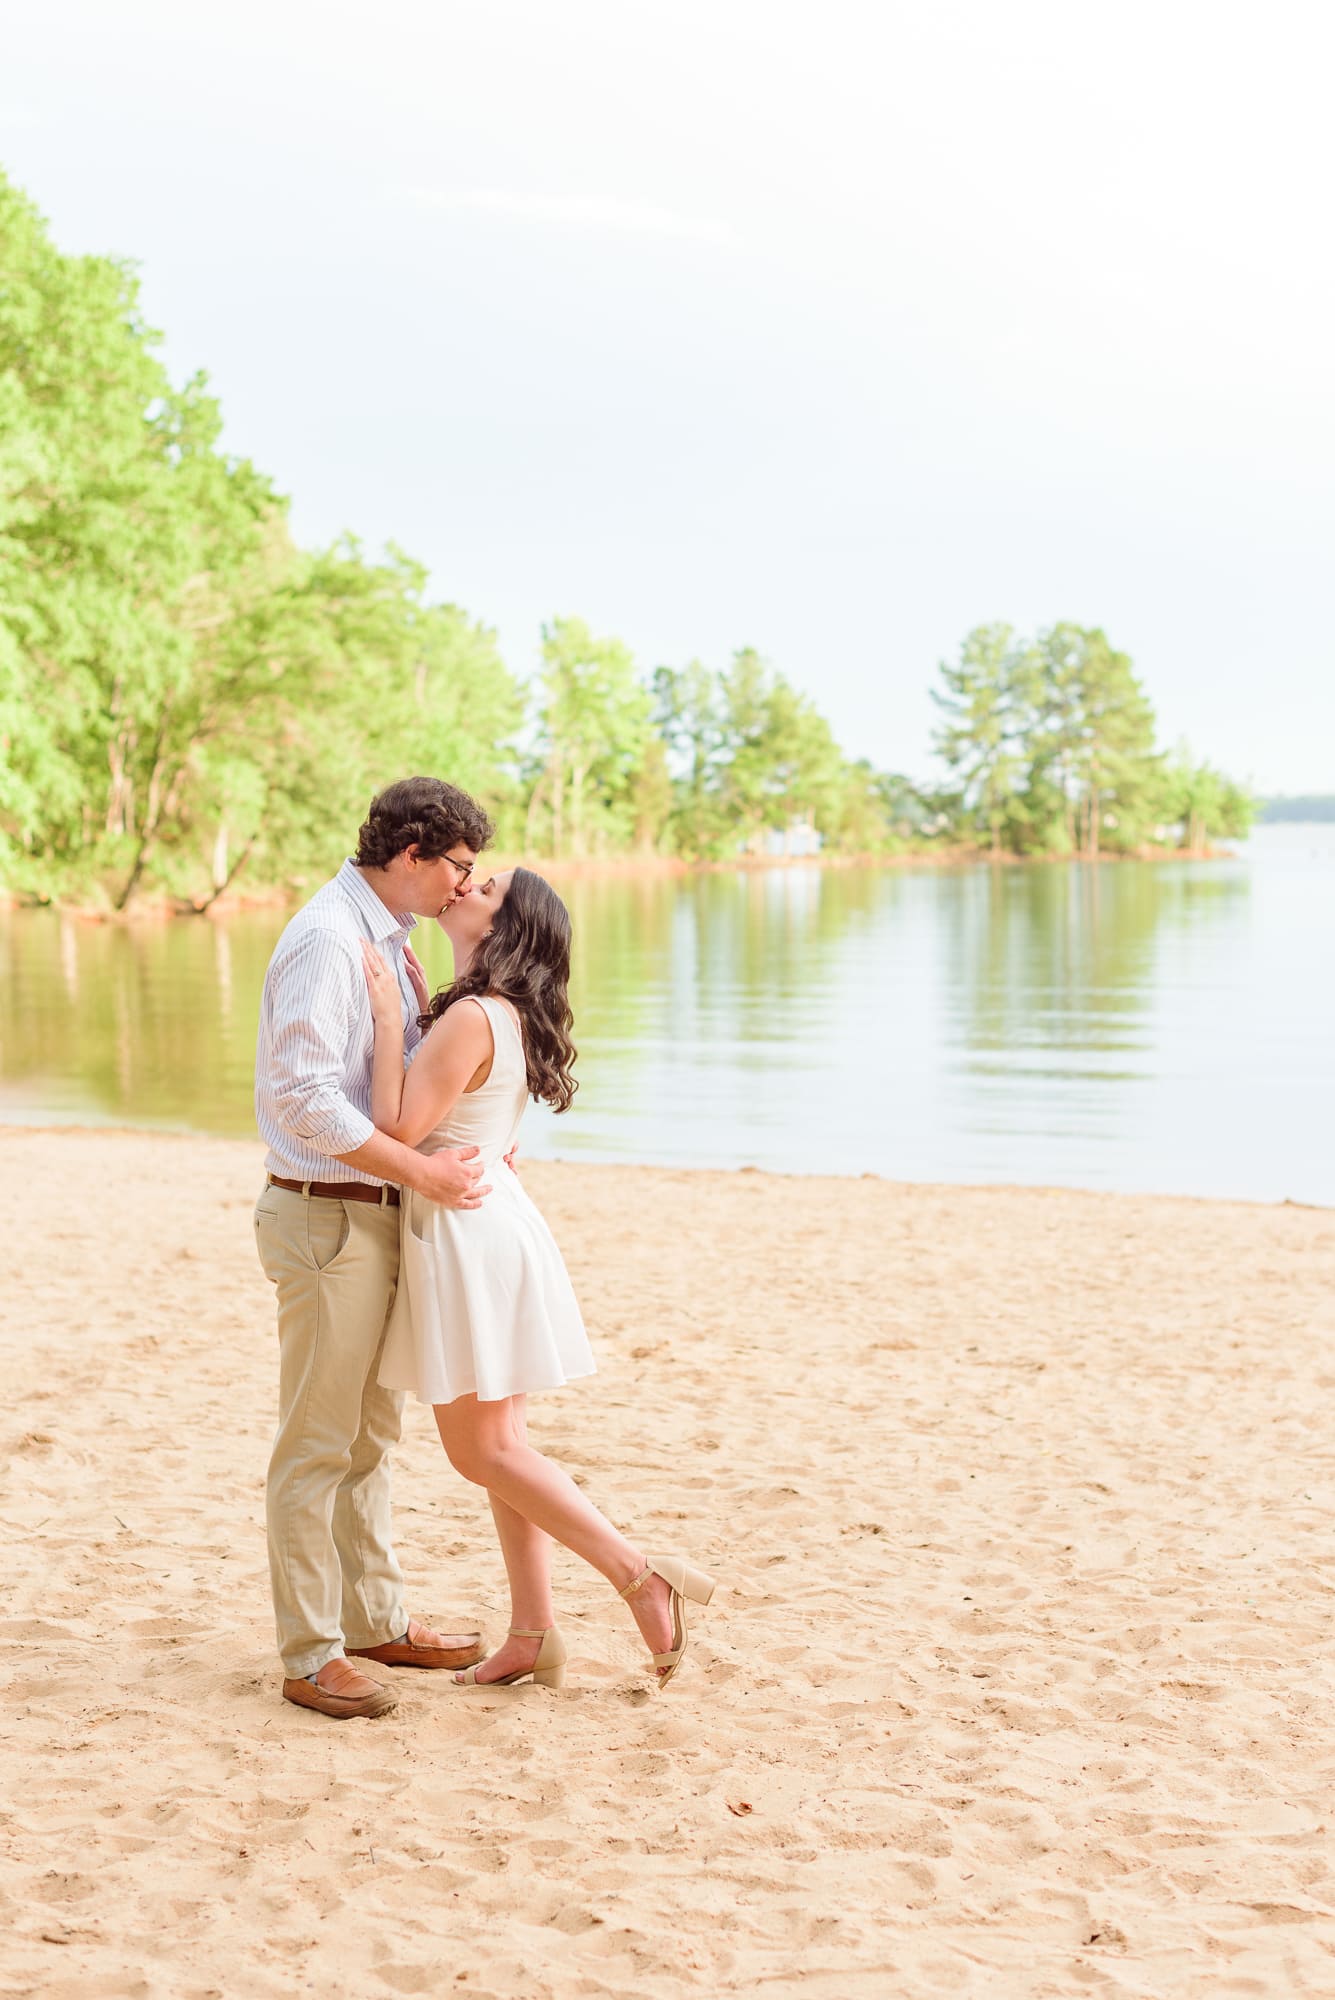 The bride and groom kiss during their engagement photos with the Jetton Park beach in the background.